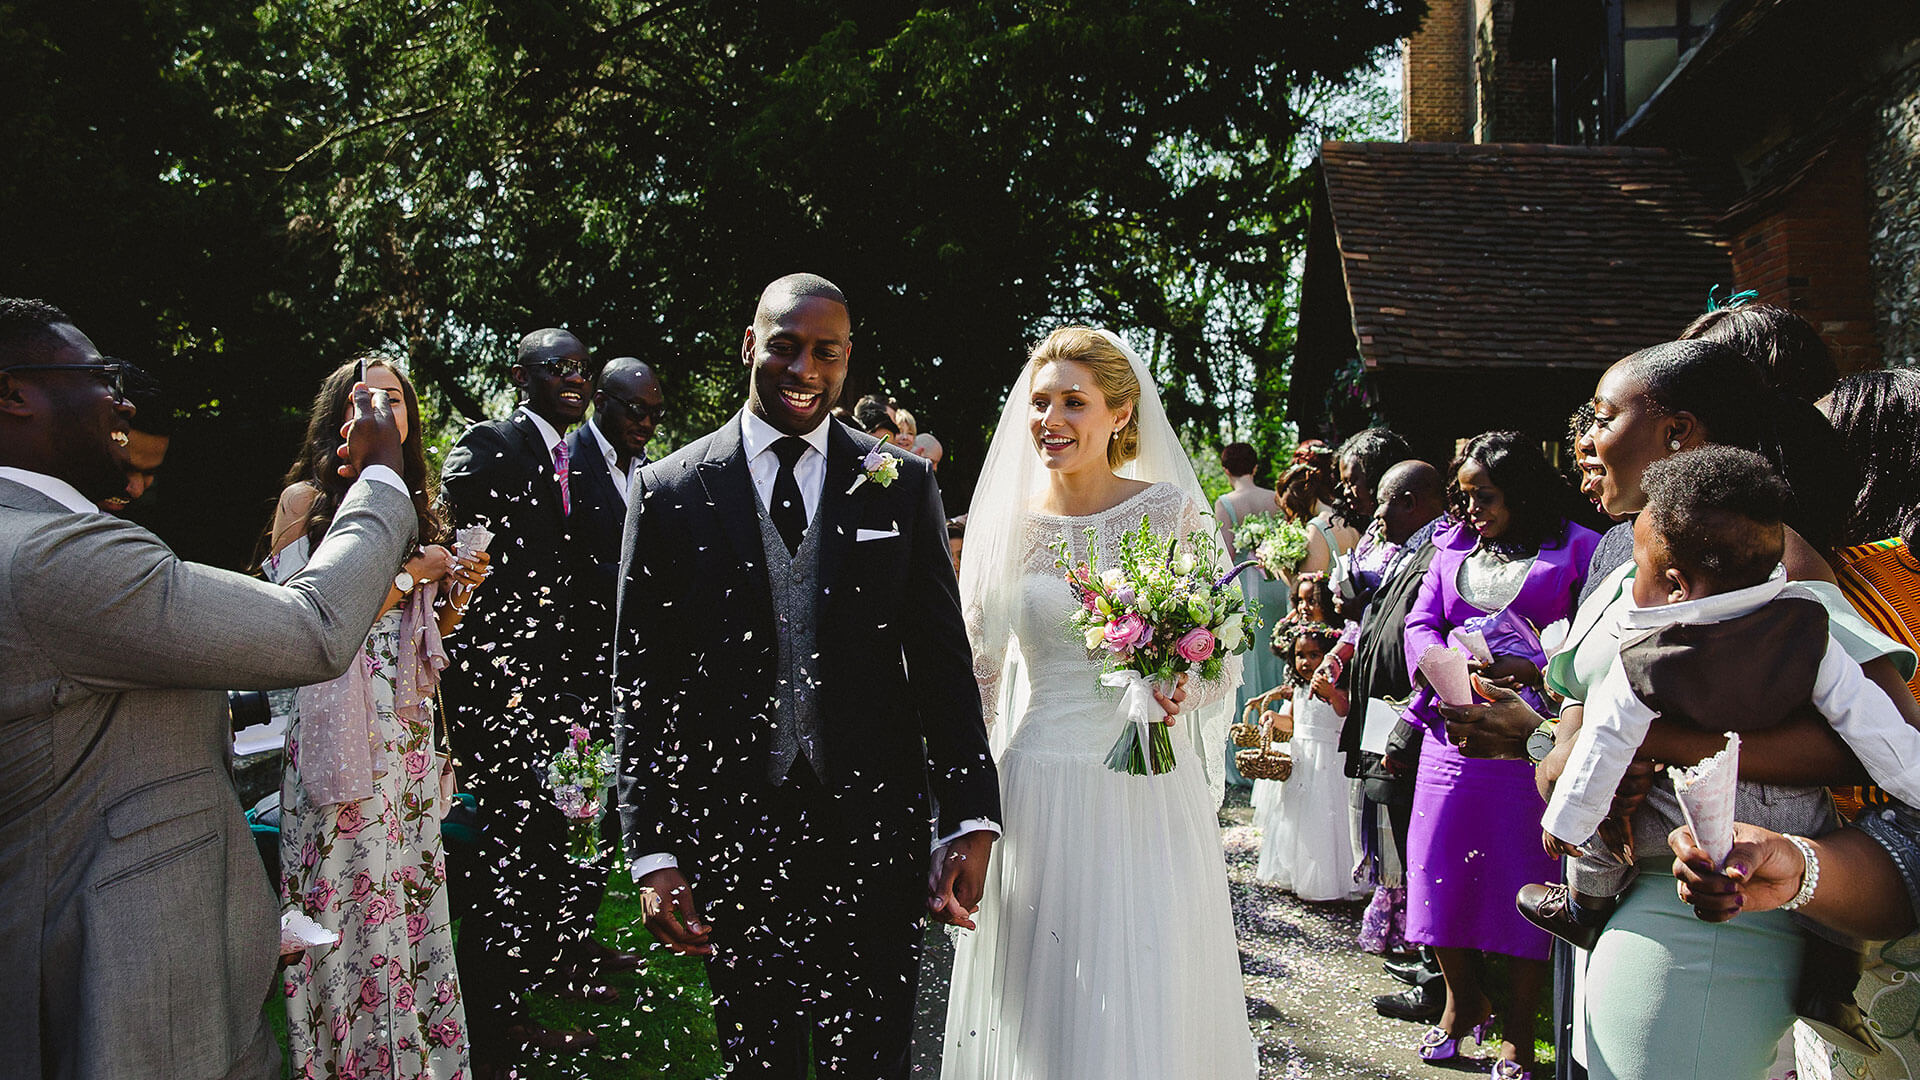 Guests throw confetti at a happy couple after their church wedding in Essex